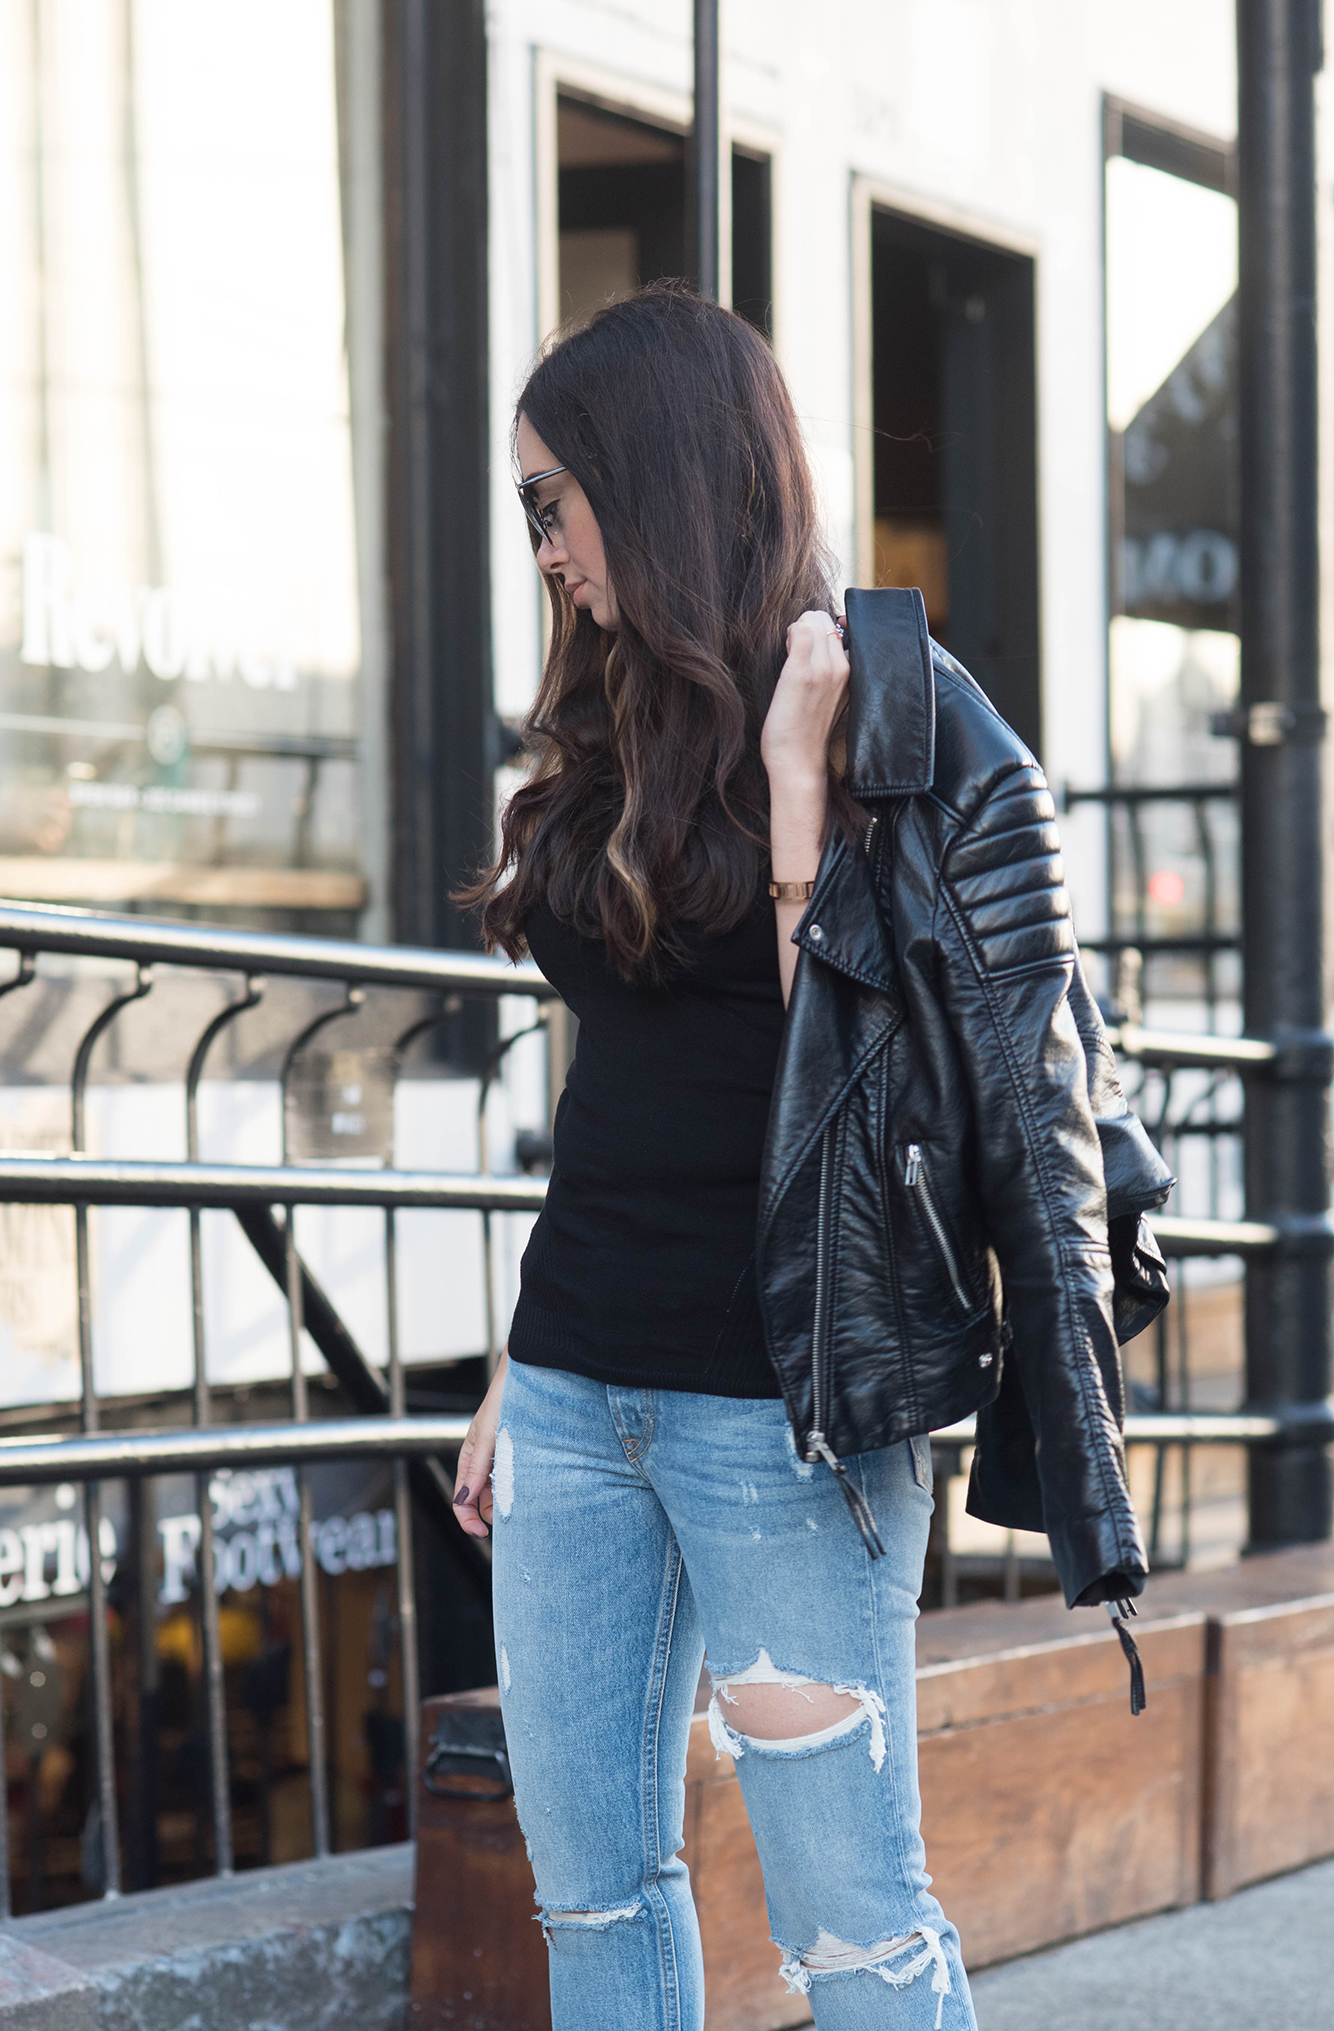 coco-and-vera-top-vancouver-fashion-blog-top-canadian-fashion-blog-top-blogger-street-style-le-chateau-mock-neck-top-hm-vegan-leather-jacket-grlfrnd-jeans